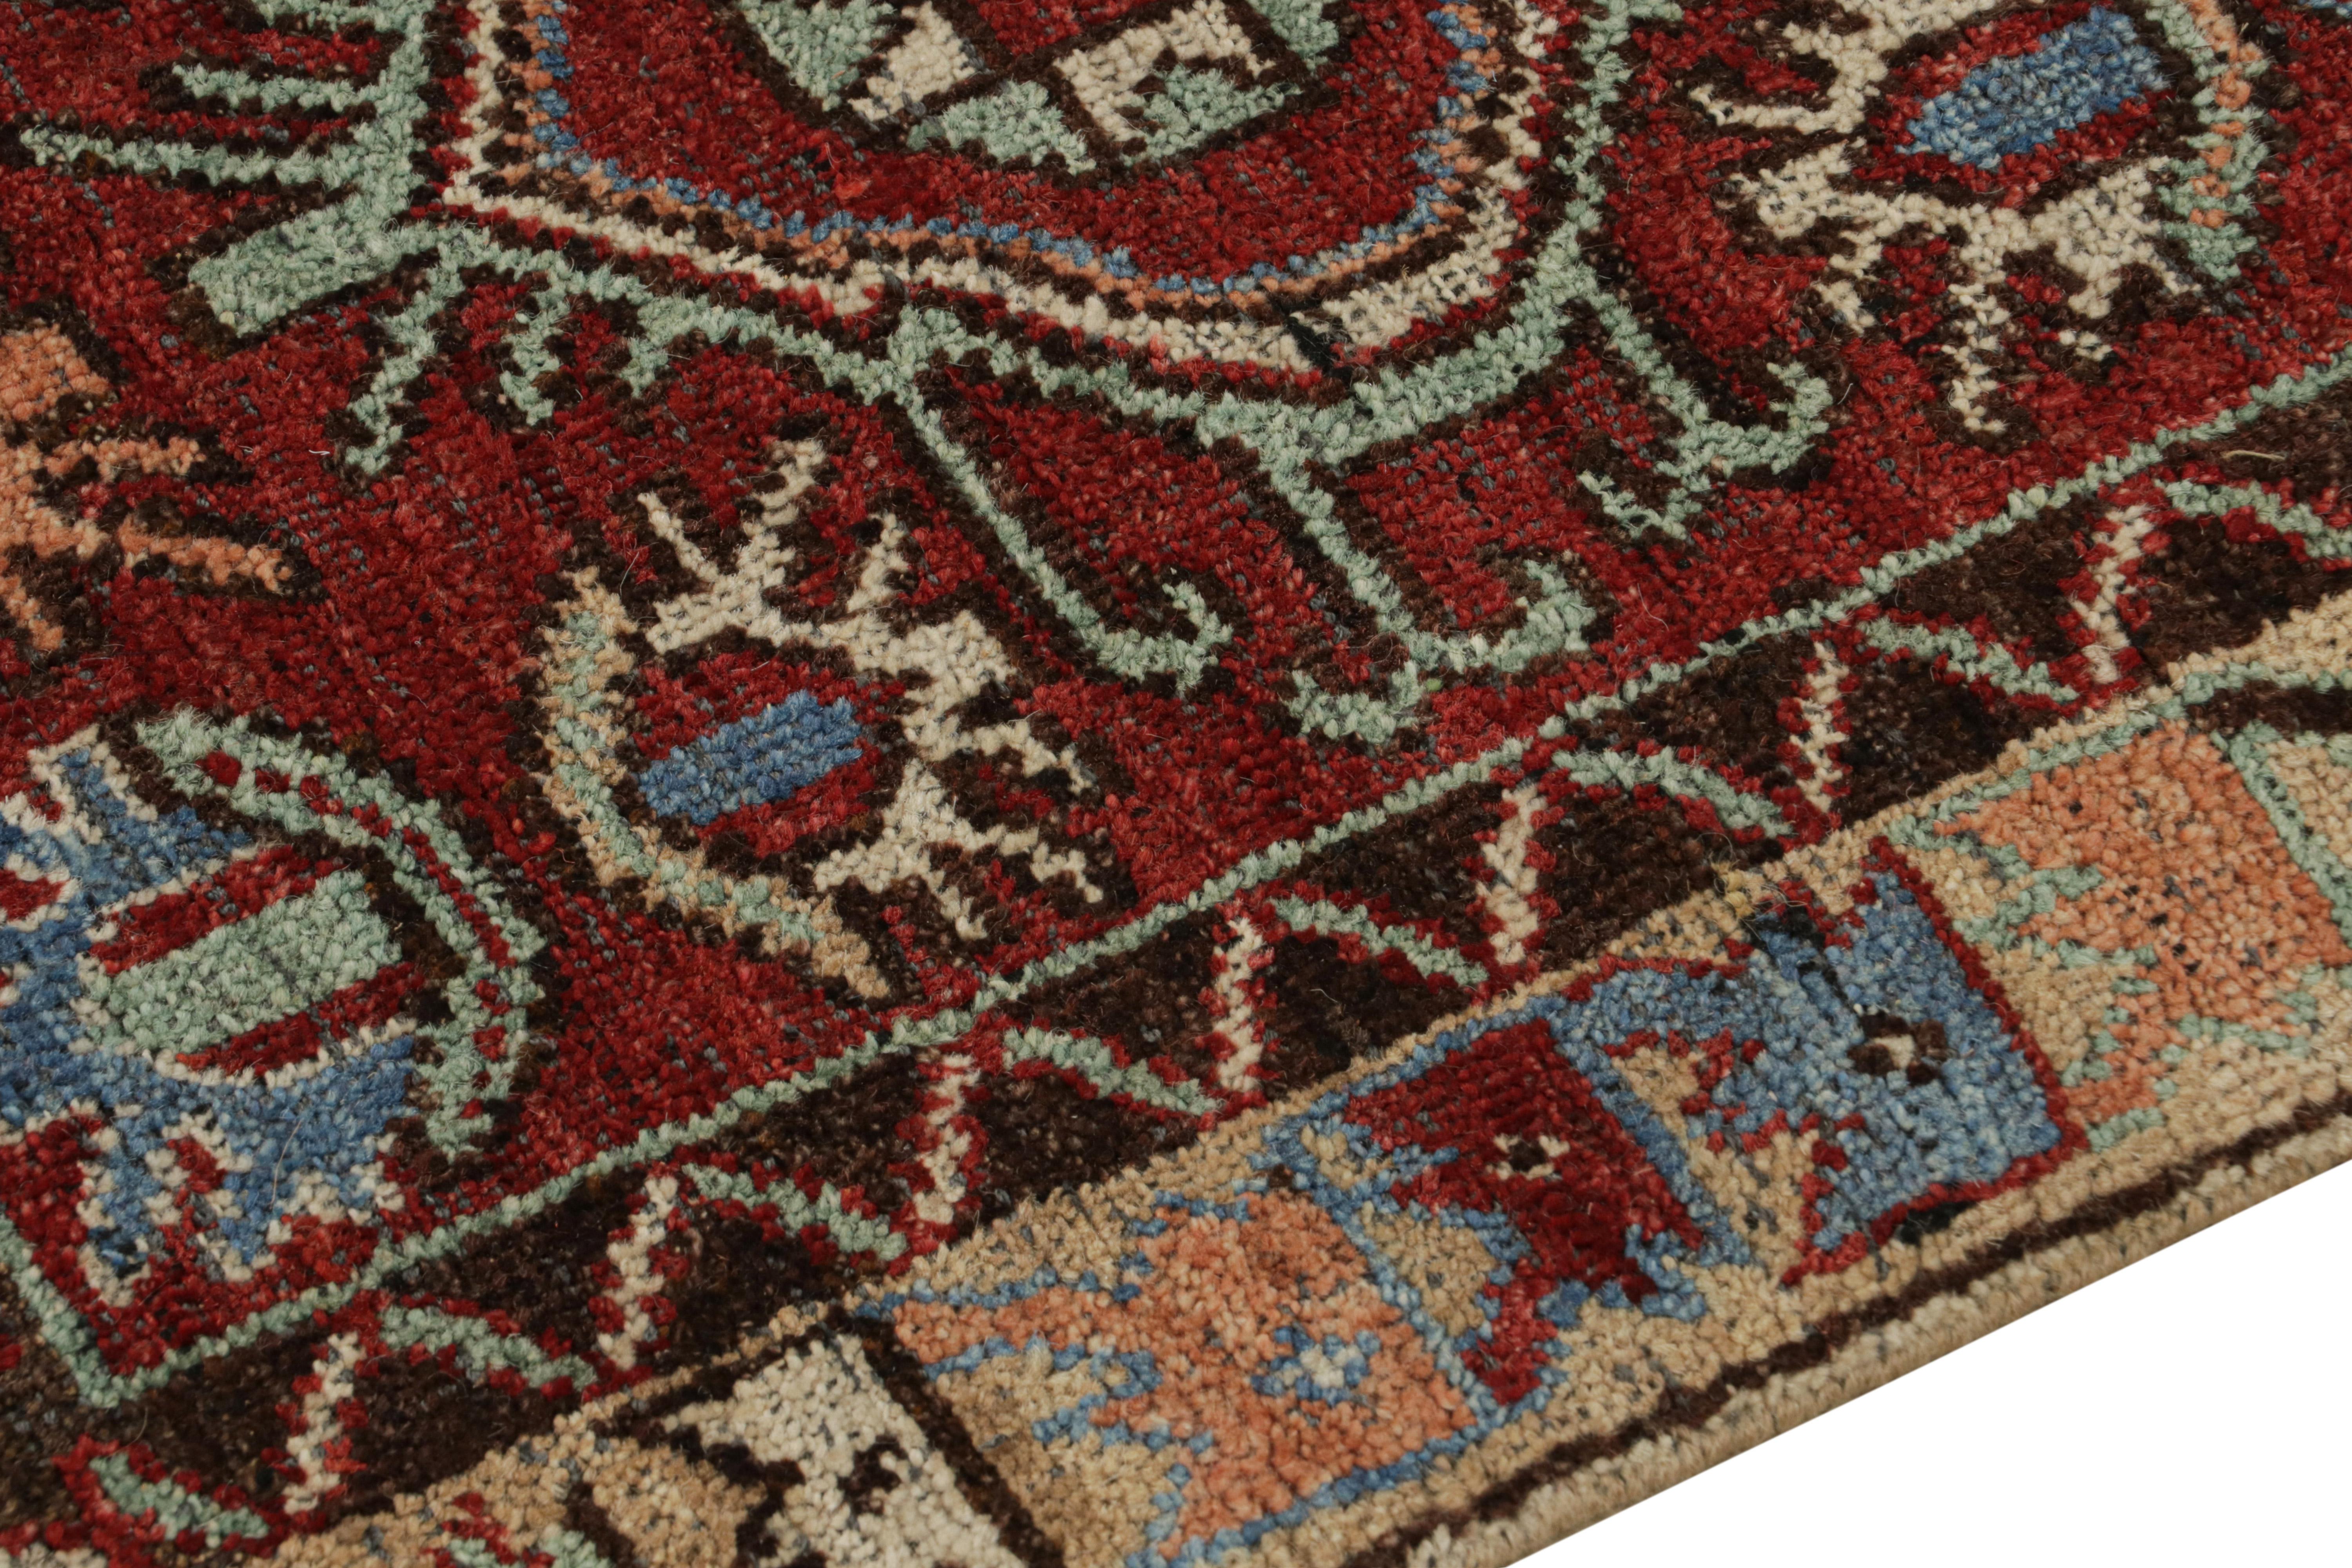 Contemporary Rug & Kilim’s Antique Tribal Style Rug in Red with Geometric Patterns For Sale